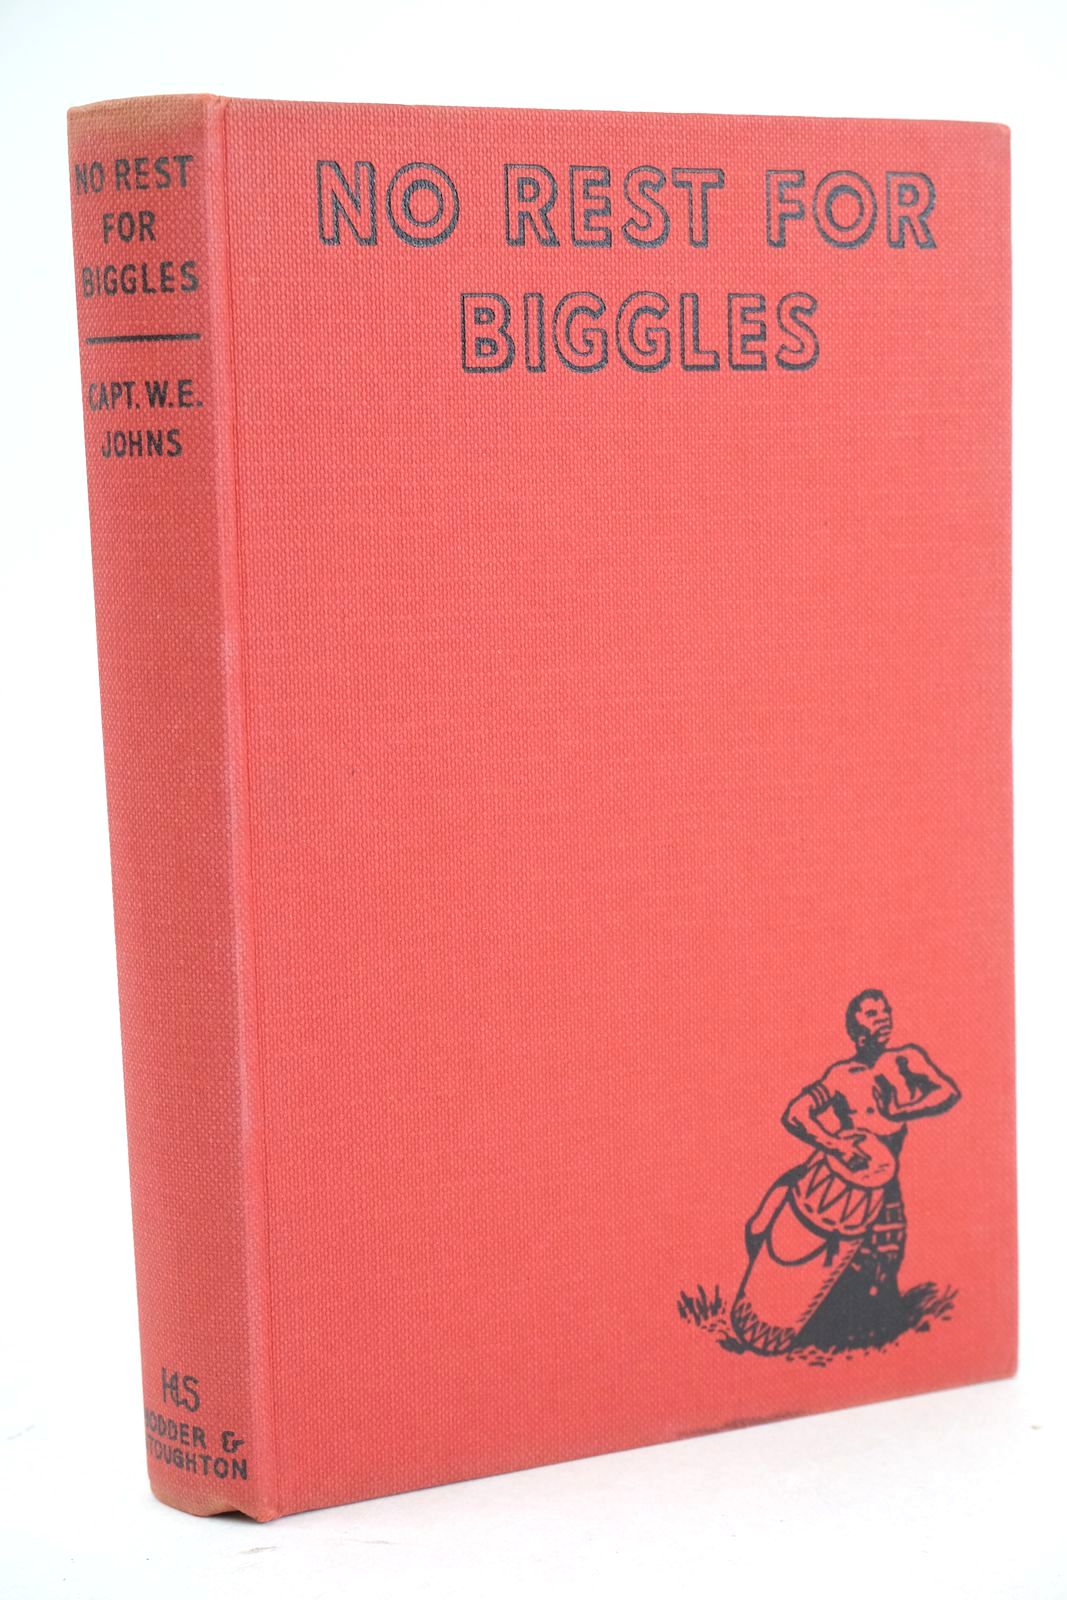 Photo of NO REST FOR BIGGLES written by Johns, W.E. illustrated by Stead,  published by Hodder & Stoughton (STOCK CODE: 1325770)  for sale by Stella & Rose's Books